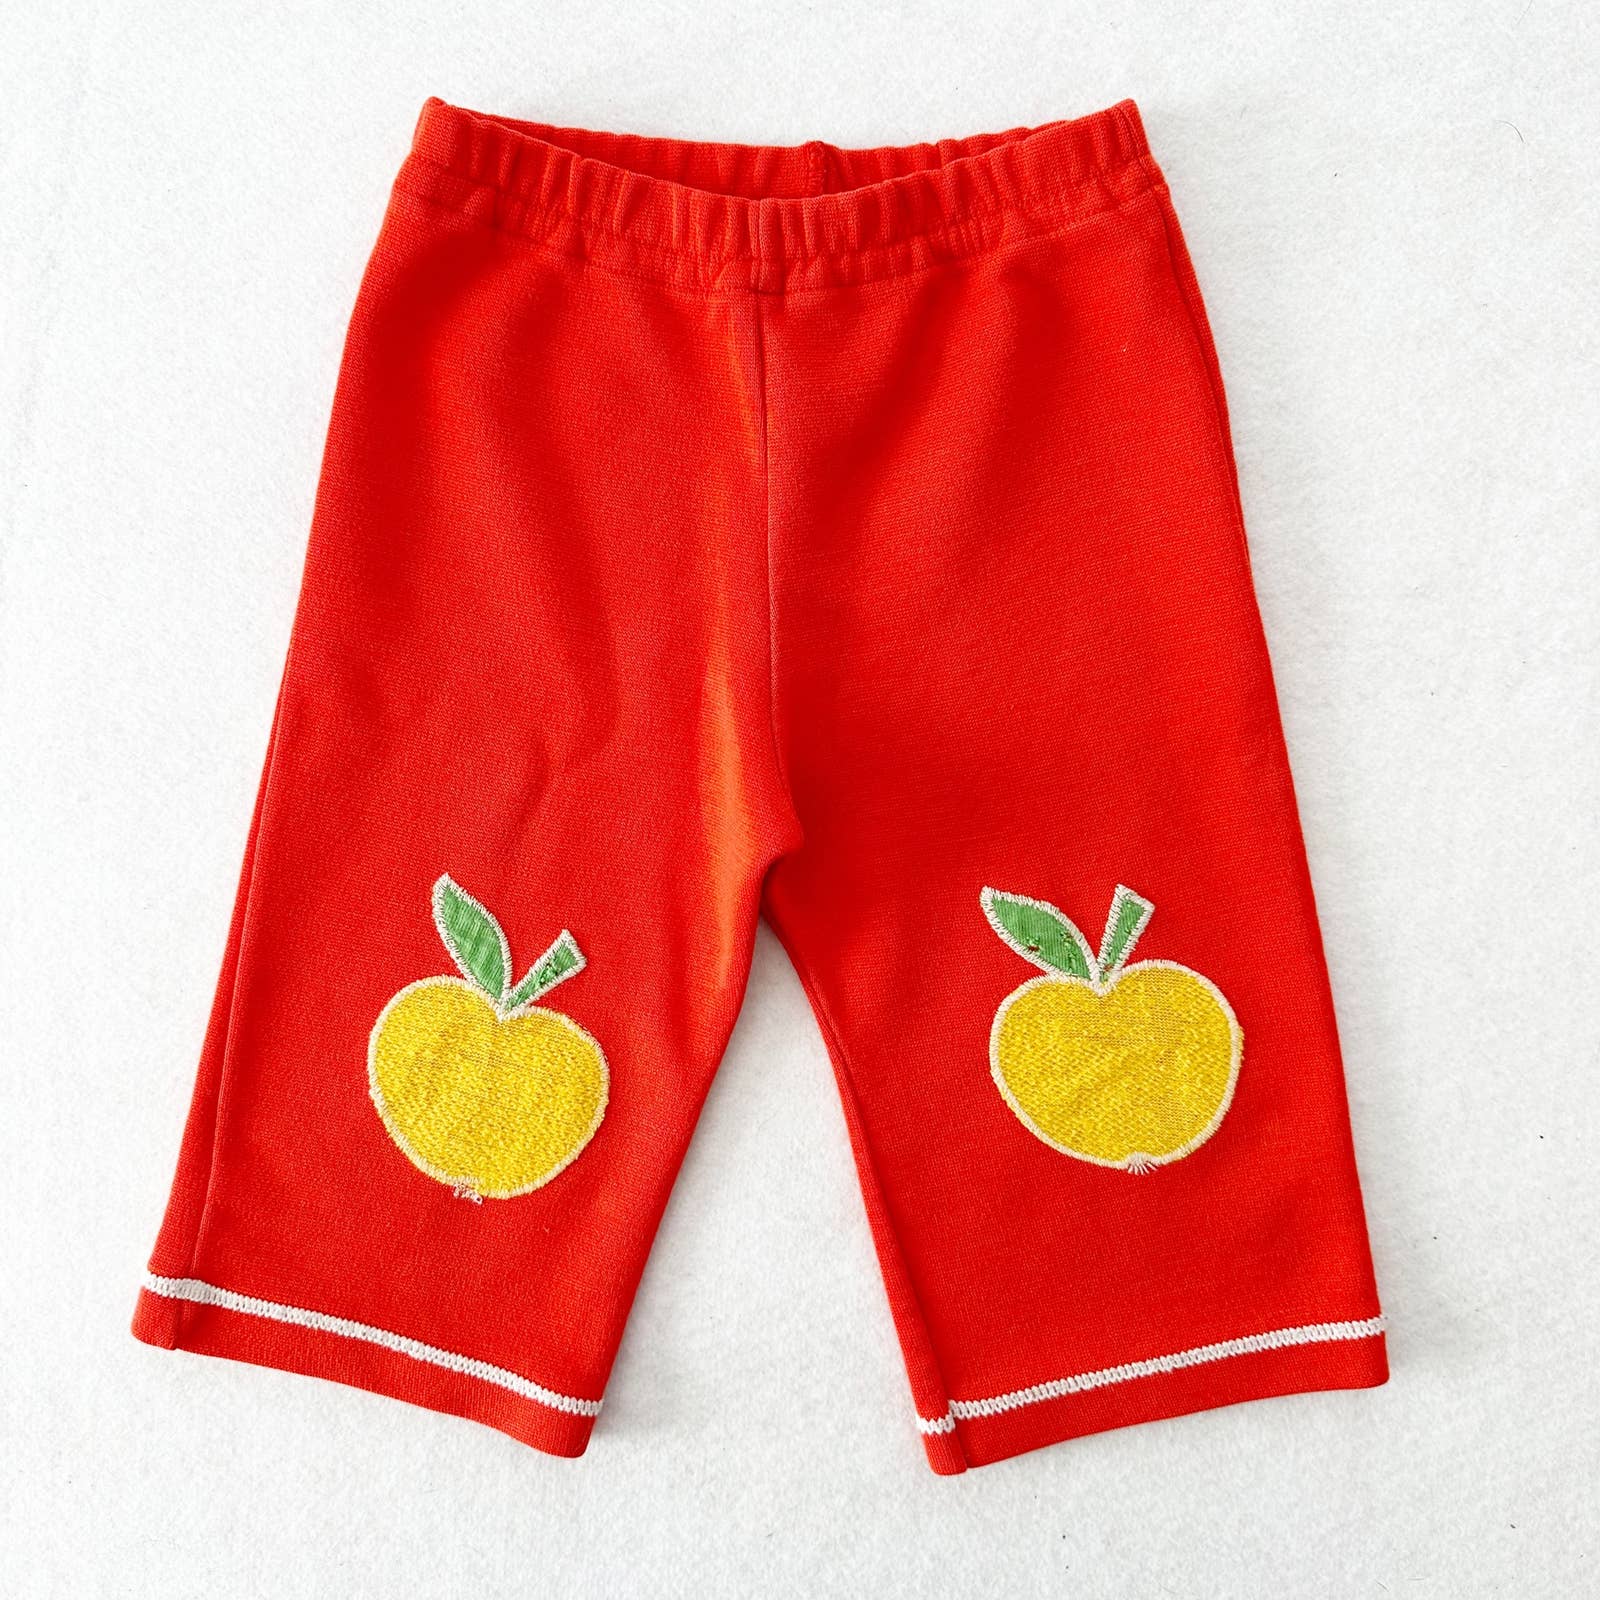 Vintage Carter's Apple Knee Pull On Pants: 9/12m? – Yellow Clover